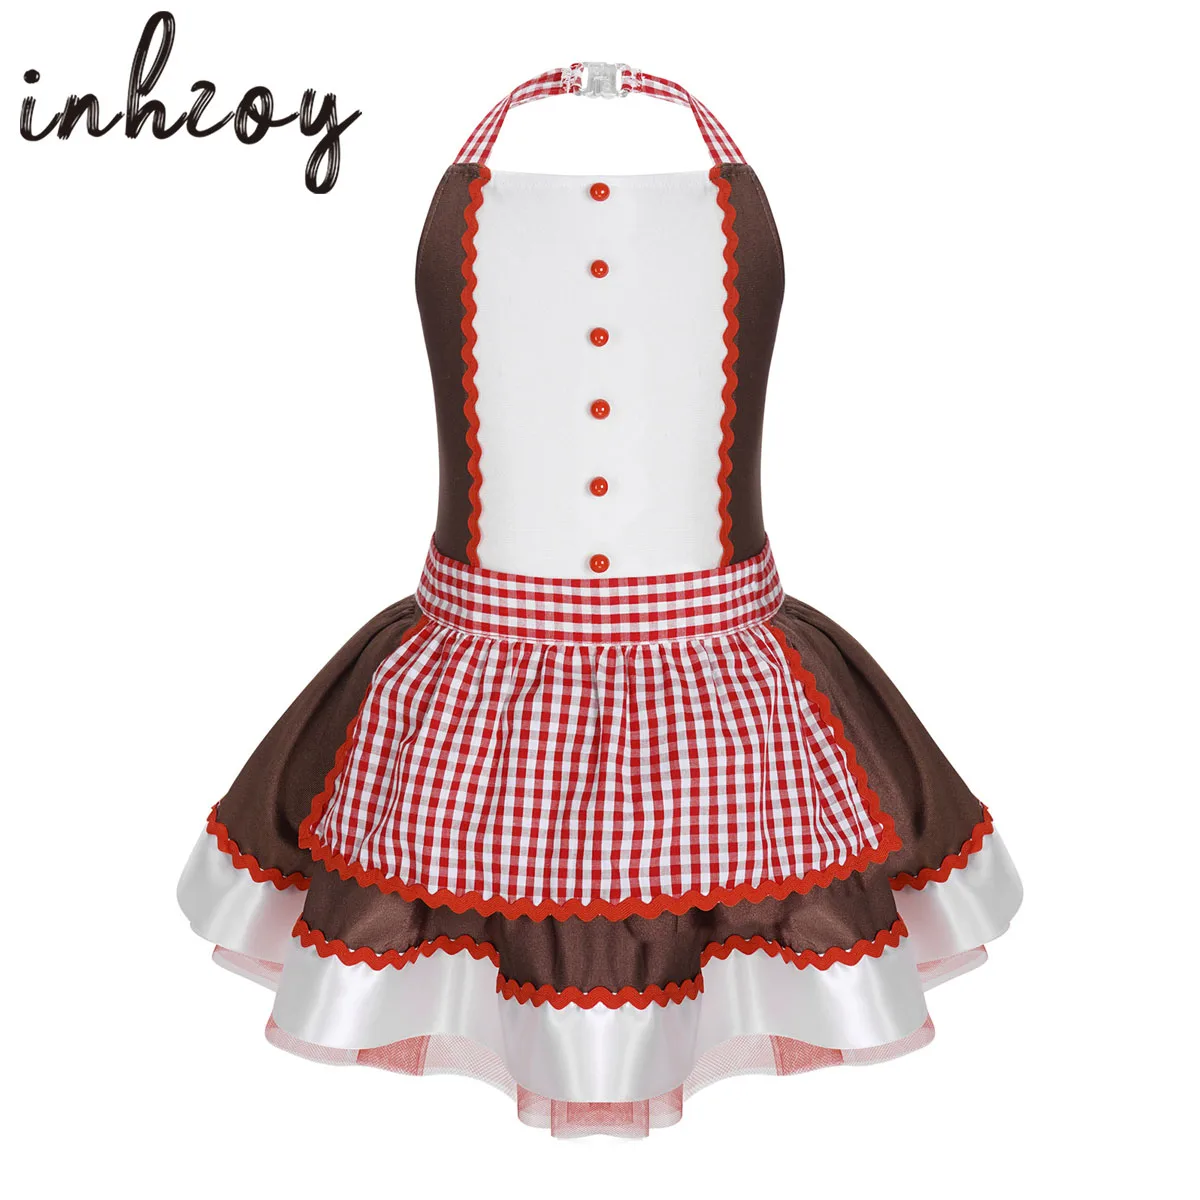 

Kids Girls Gingerbread Tutu Dress Costume Striped Bowknot Apron Halloween Christmas Cosplay Dress Up Leotard Party Clothes